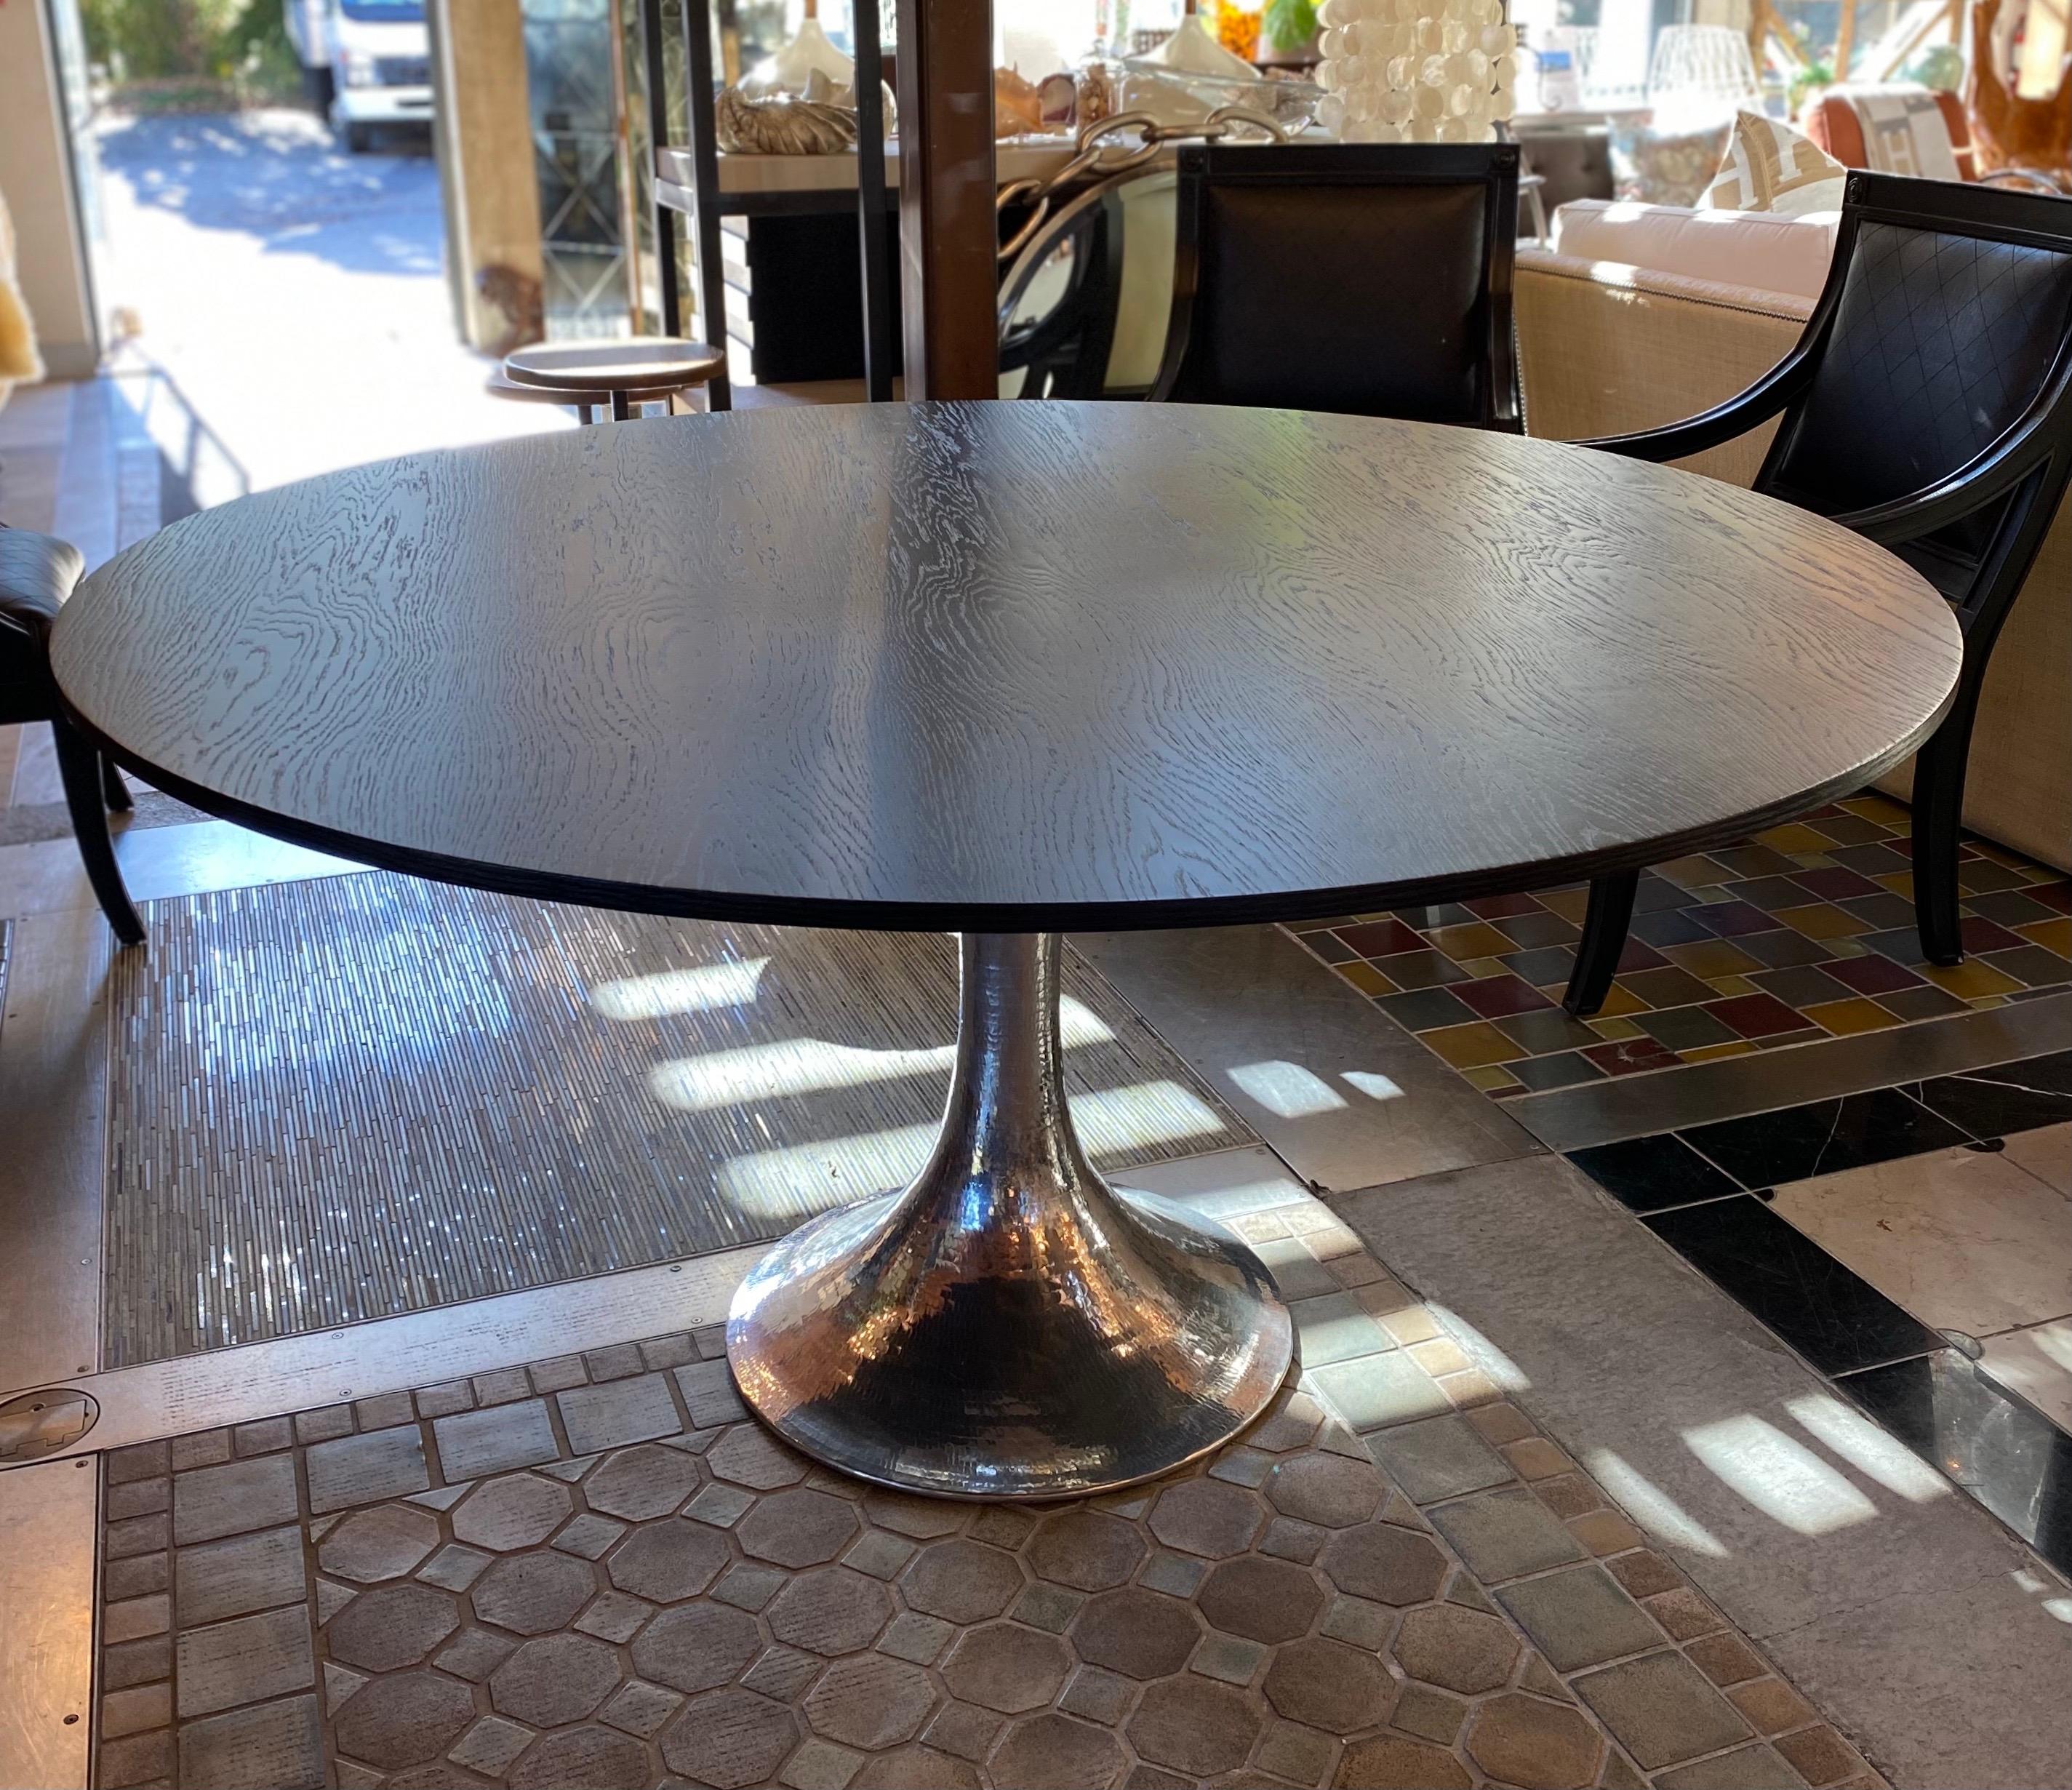 Round dinning table dark wood with chrome base

Measures: 60